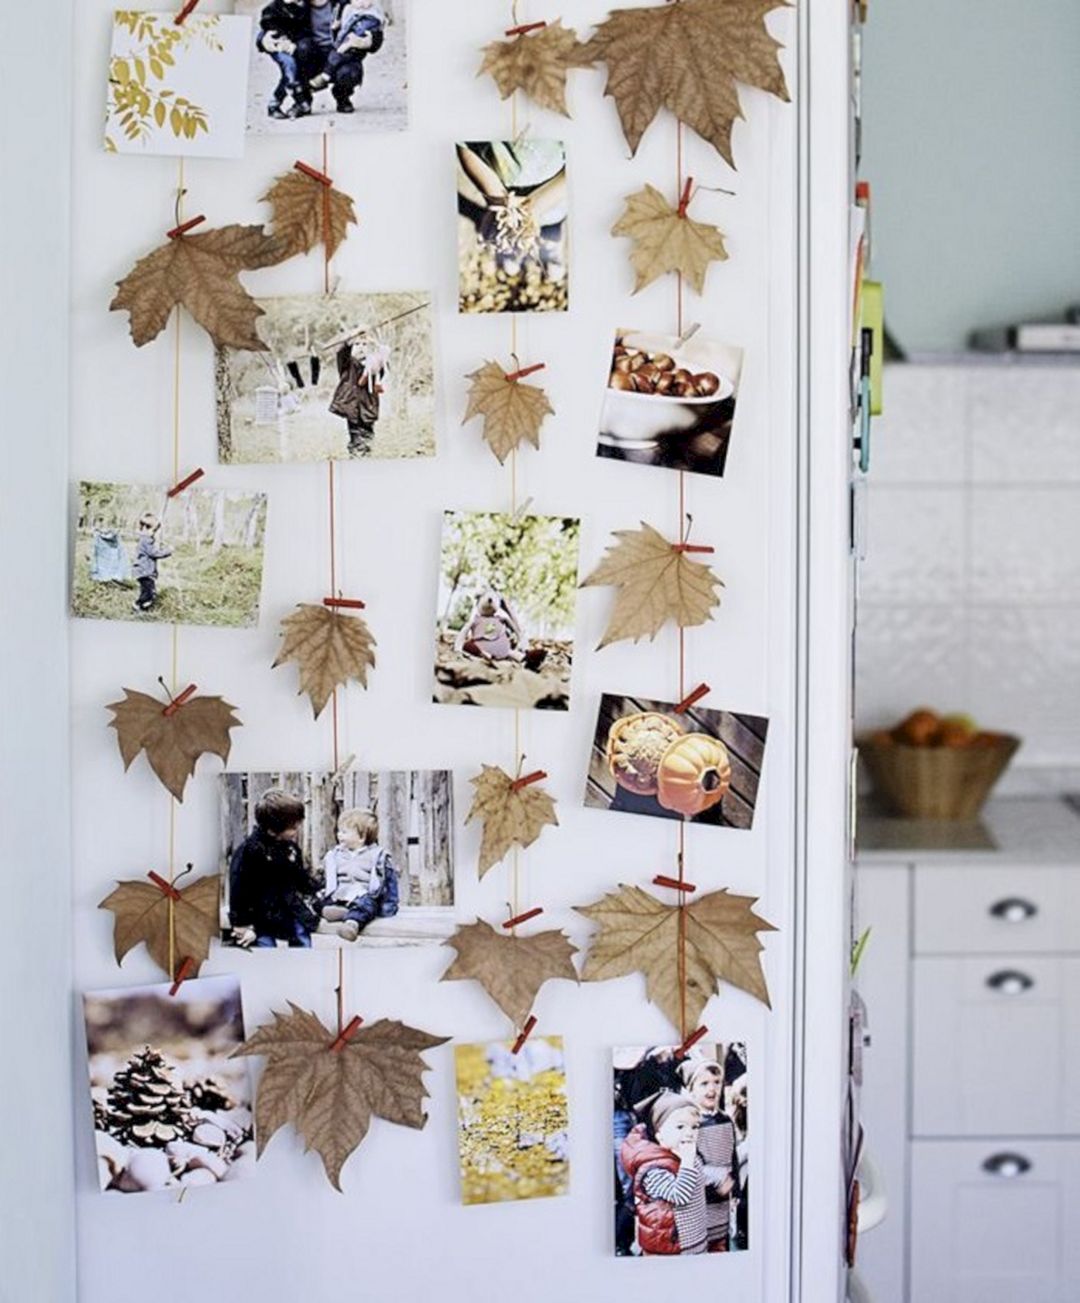 Autumn Wall Decor From The Pled